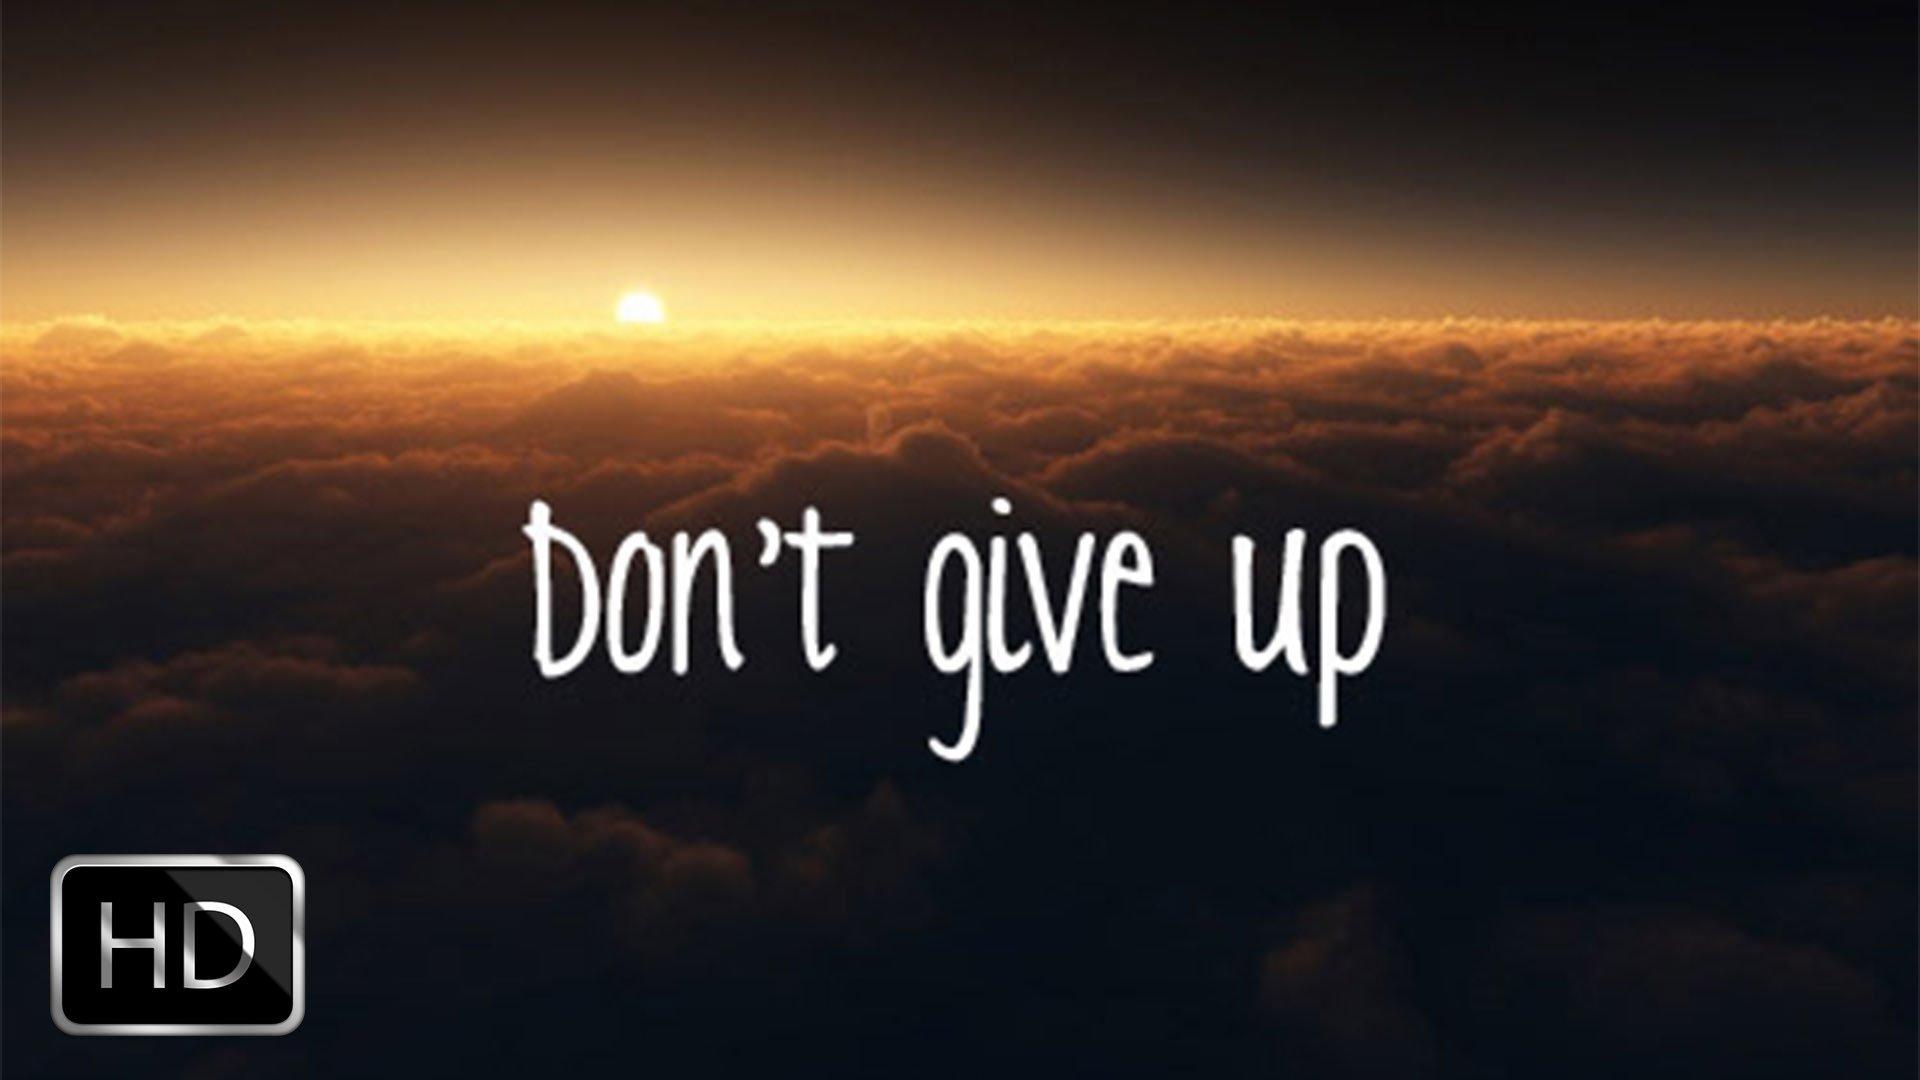 Dont give up wallpaper 1920x1080